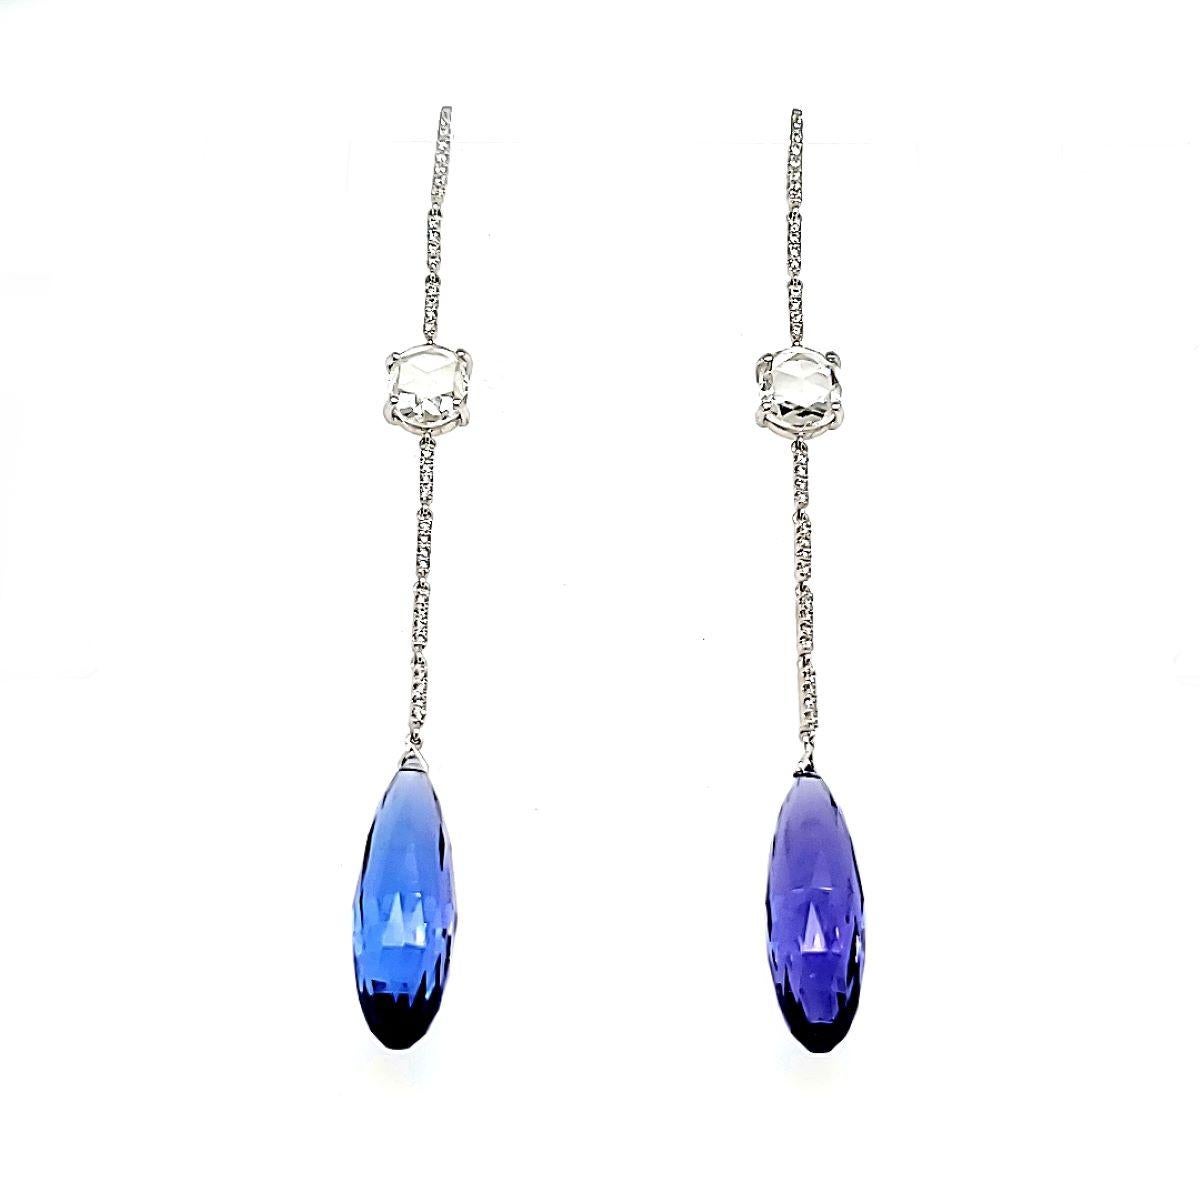 The possibilities are endless with these versatile and captivating drop earrings.

Adorned with 2 Tanzanite Faceted Drops totaling 23.70 carats, each earring features a mesmerizing Tanzanite hanging gracefully at the bottom.


Nestled in the center